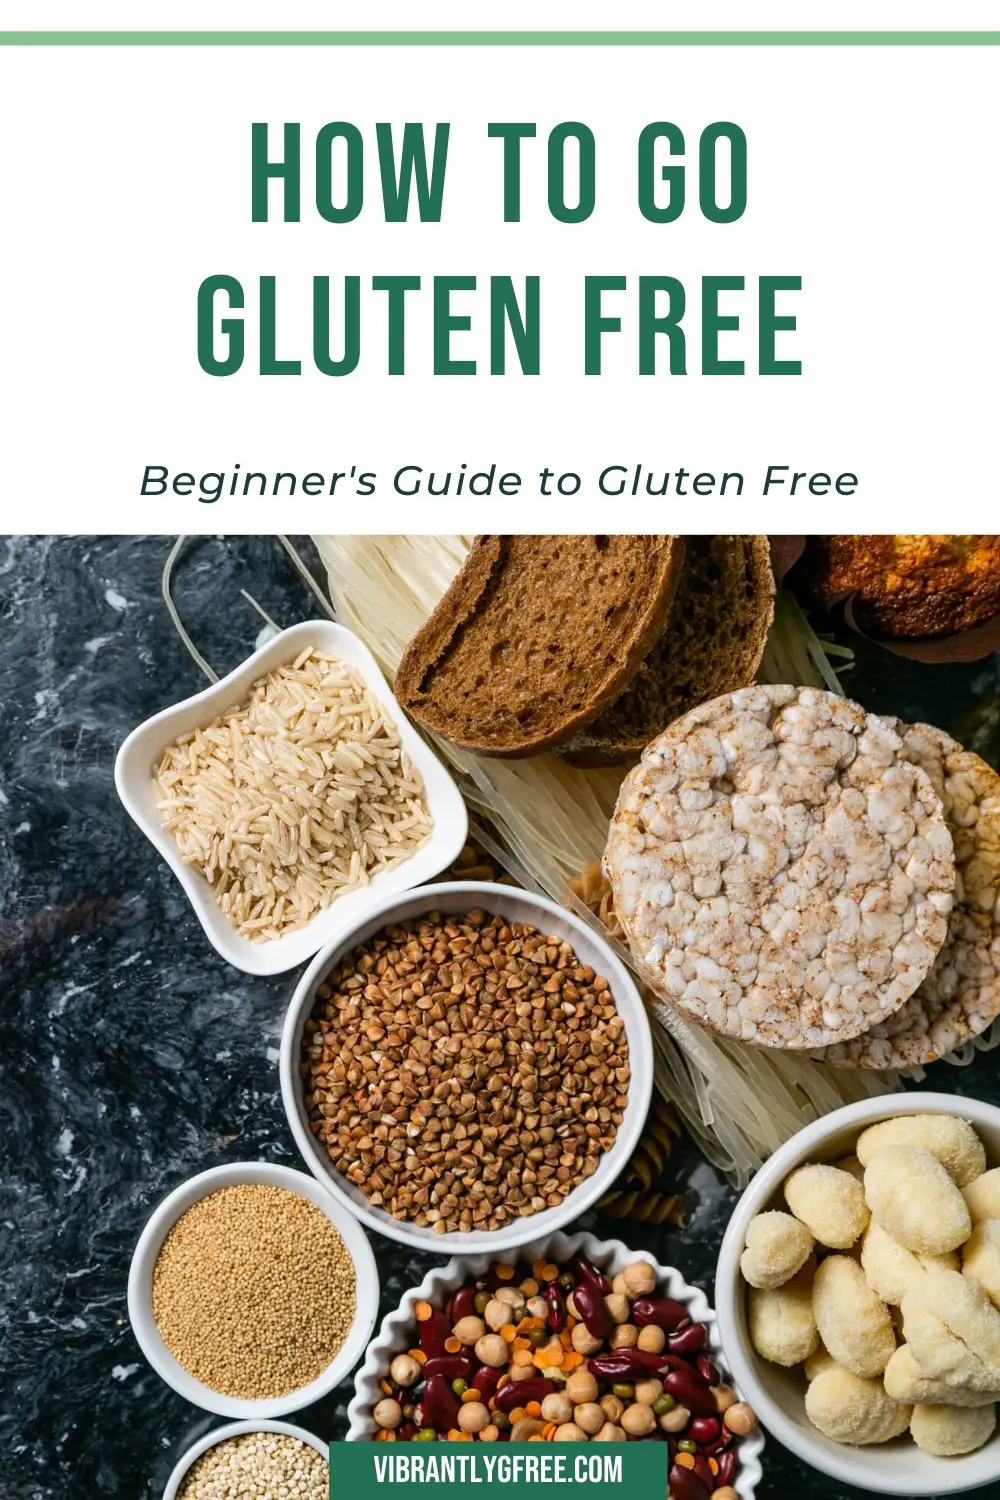 how to go gluten free 10 best tips for beginners vibrantly g free